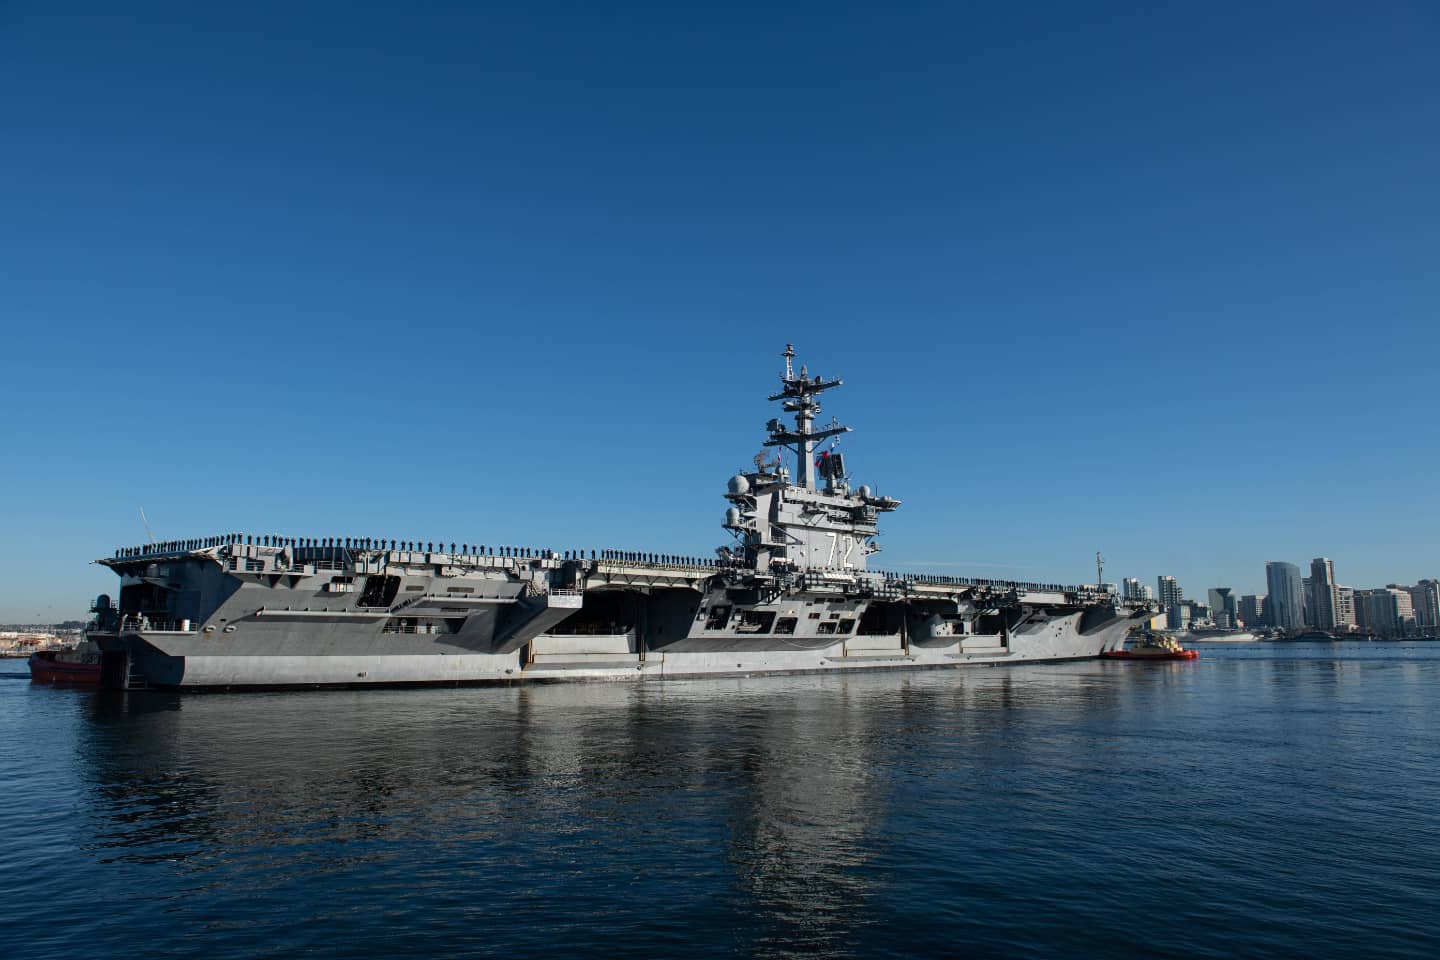 Where Is The USS Abraham Lincoln Now?